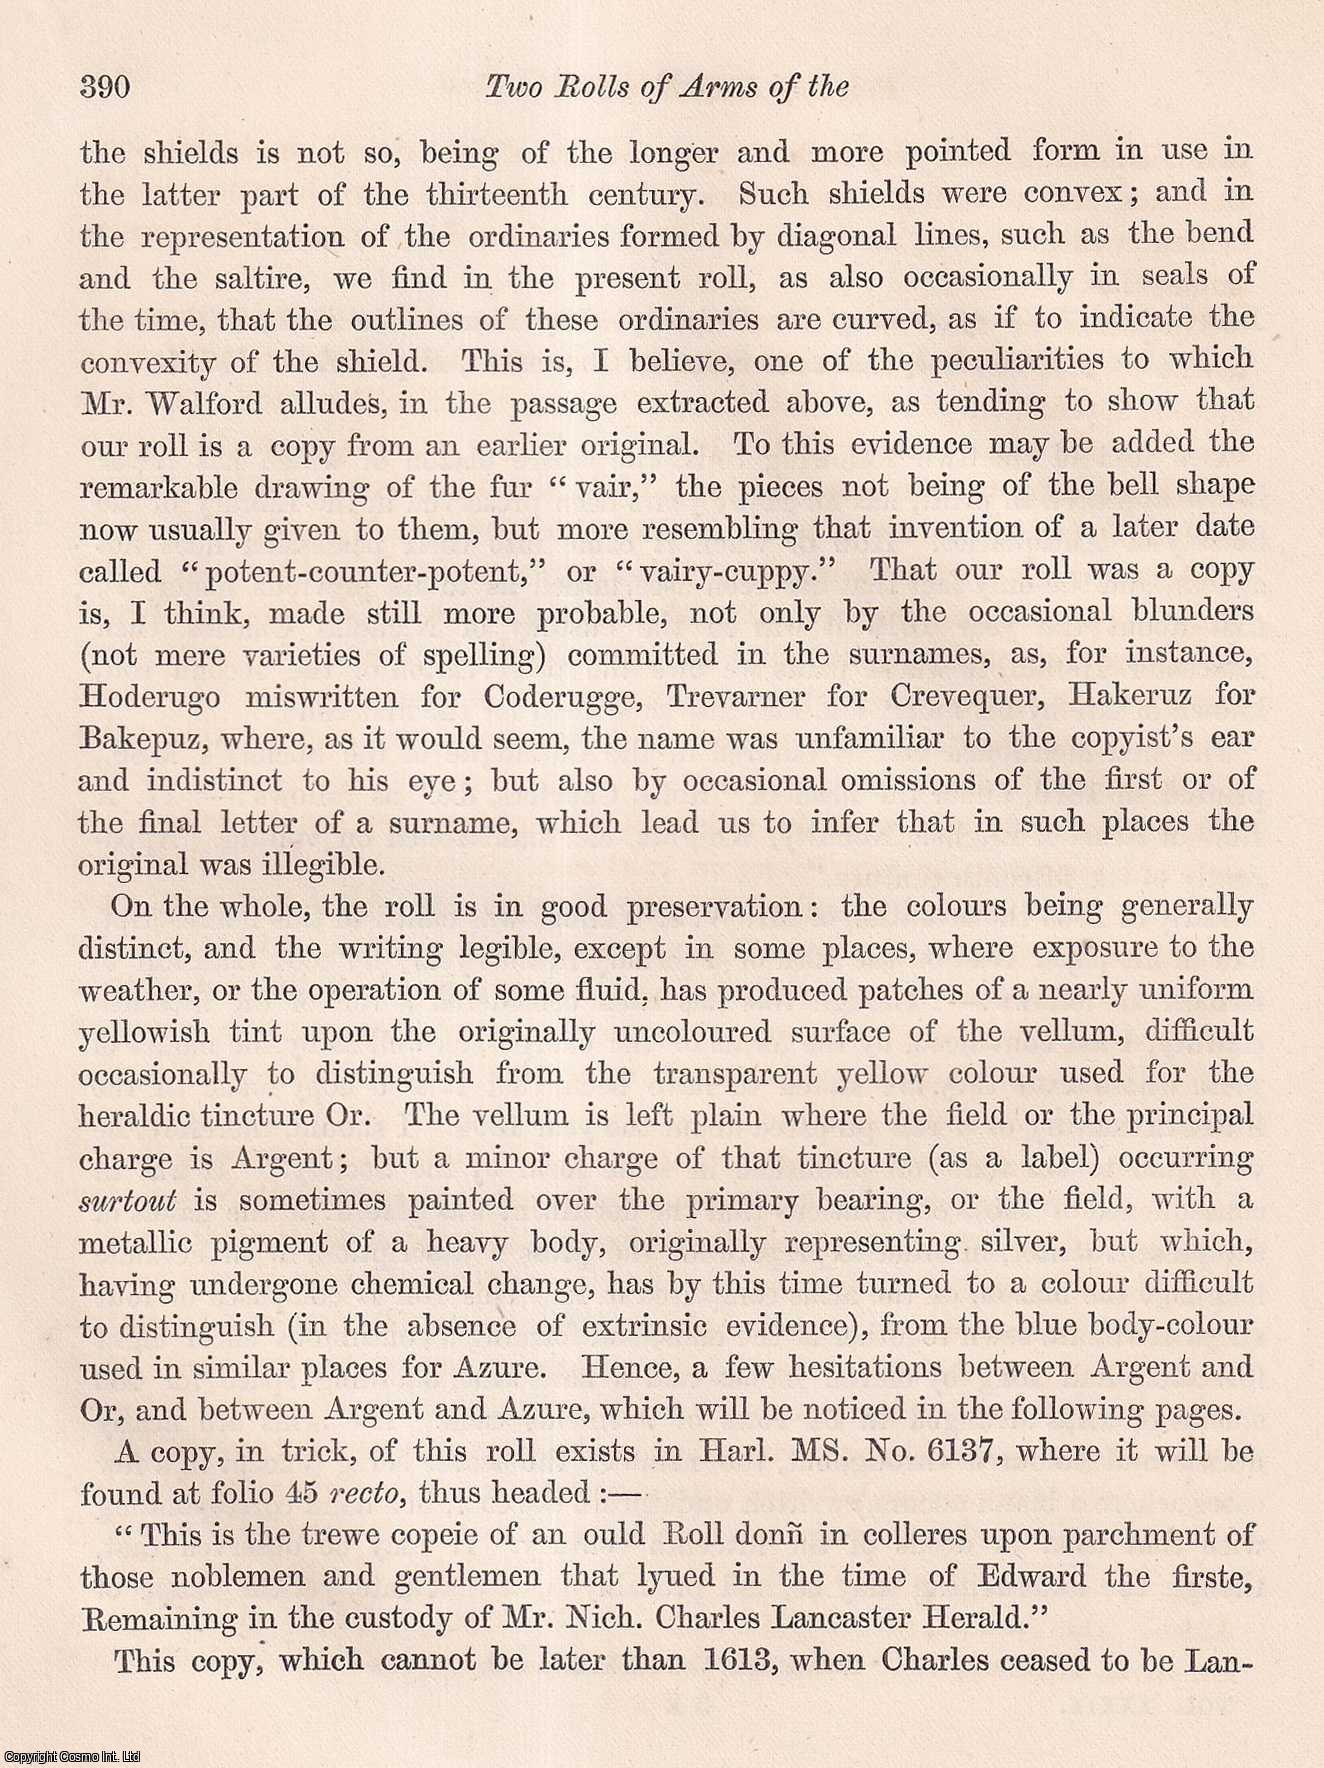 No Author Stated - Two Rolls of Arms of the Reign of King Edward the First; with some Prefatory Remarks by Charles Spencer Perceval, Esq., LL.D., F.S.A. An uncommon original article from the journal Archaeologia, 1863.